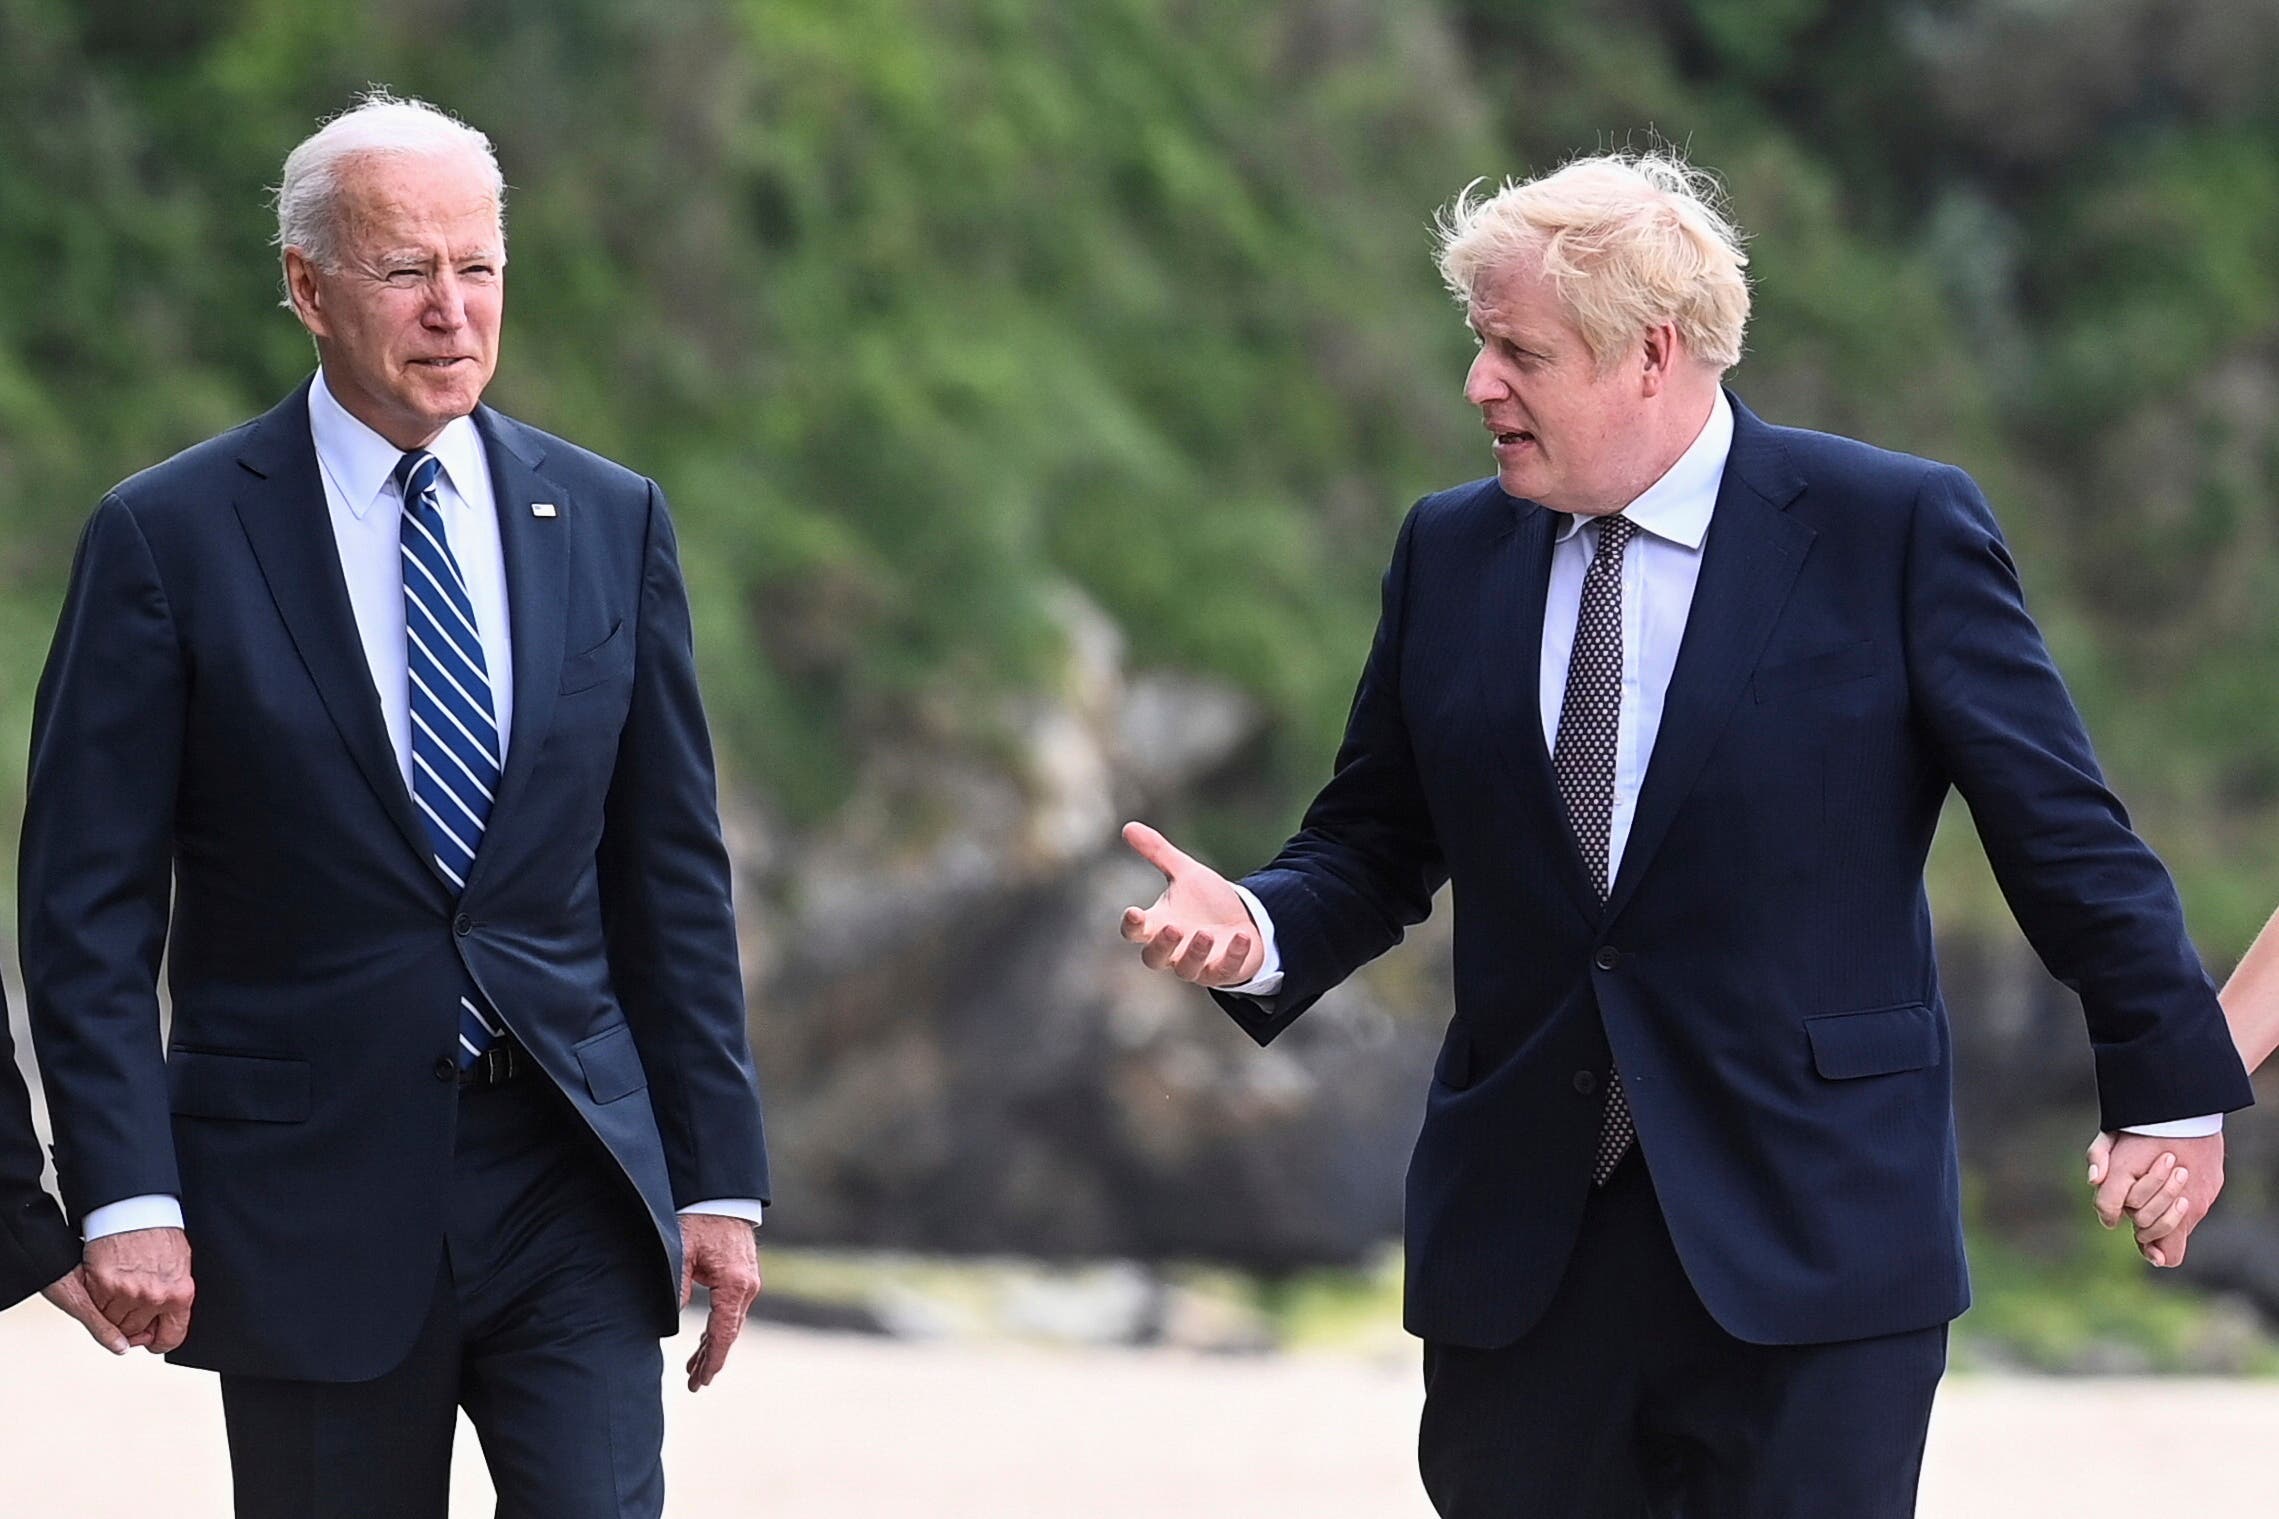  US President Joe Biden, left, talks with Prime Minister Boris Johnson, during a walk, with their wives (not pirctured) outside Carbis Bay Hotel, Carbis Bay, Cornwall, Britain, ahead of the G7 summit, Thursday June 10, 2021. (AP)